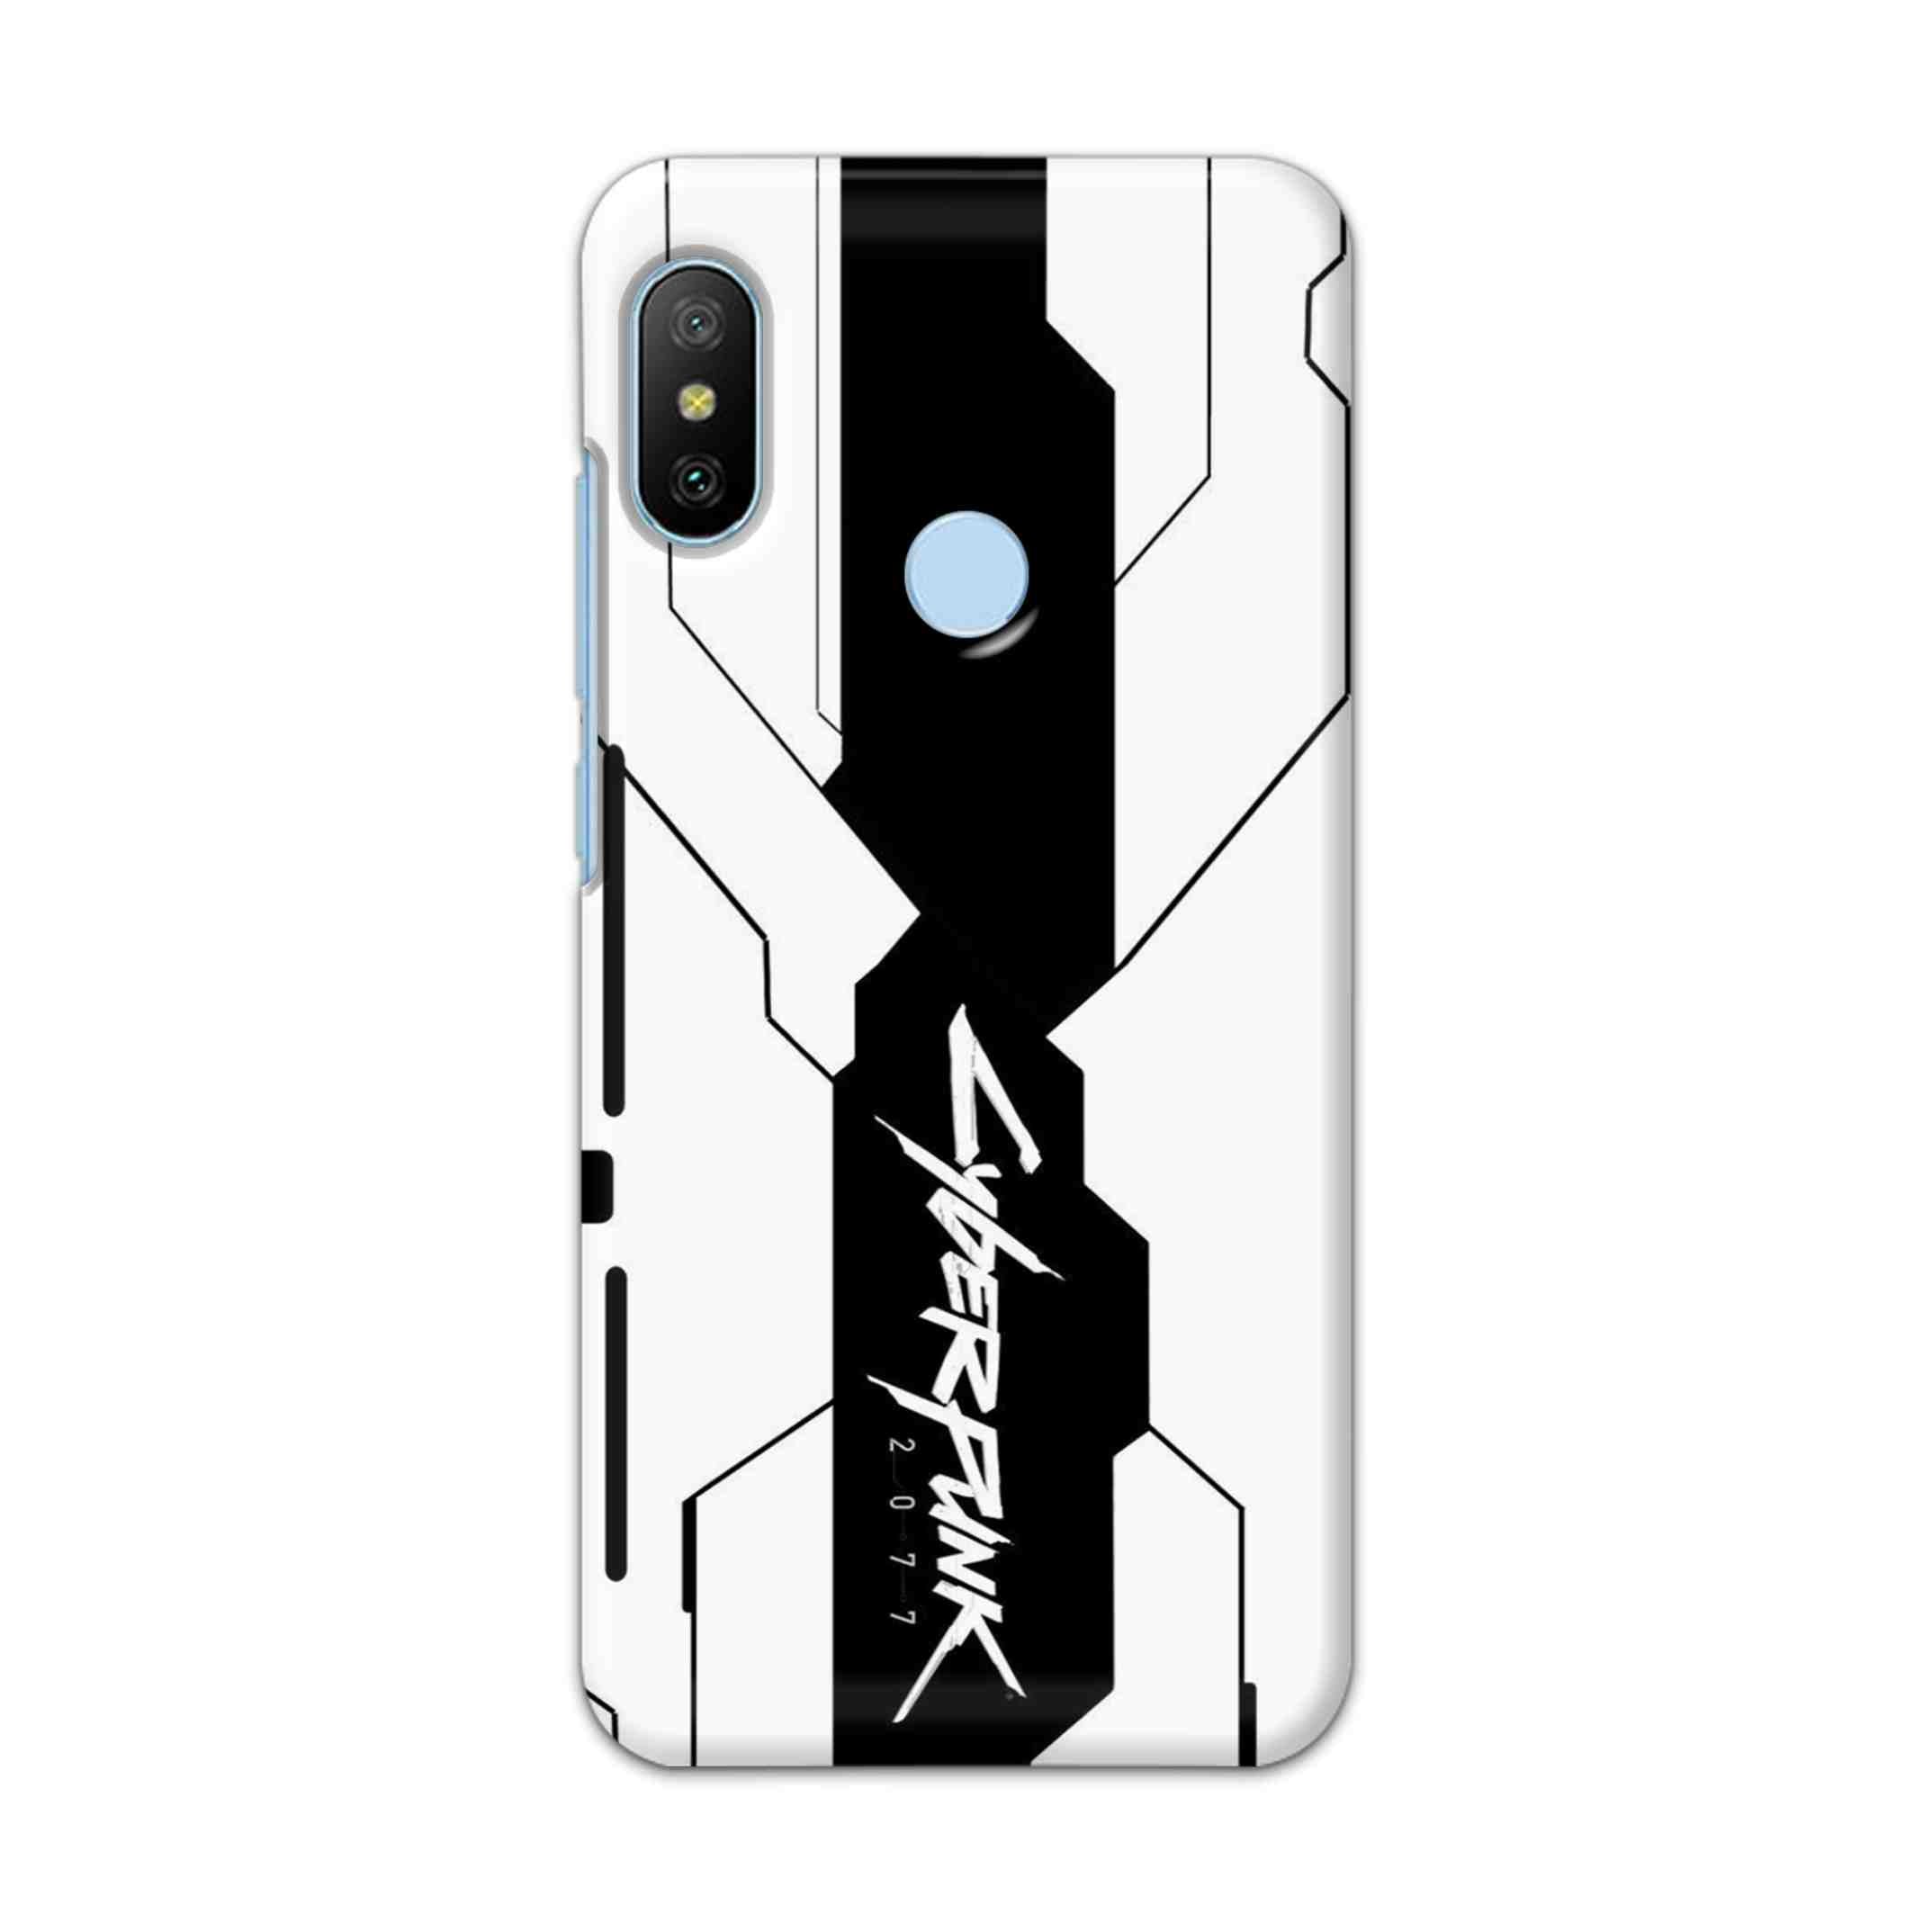 Buy Cyberpunk 2077 Hard Back Mobile Phone Case/Cover For Xiaomi Redmi 6 Pro Online